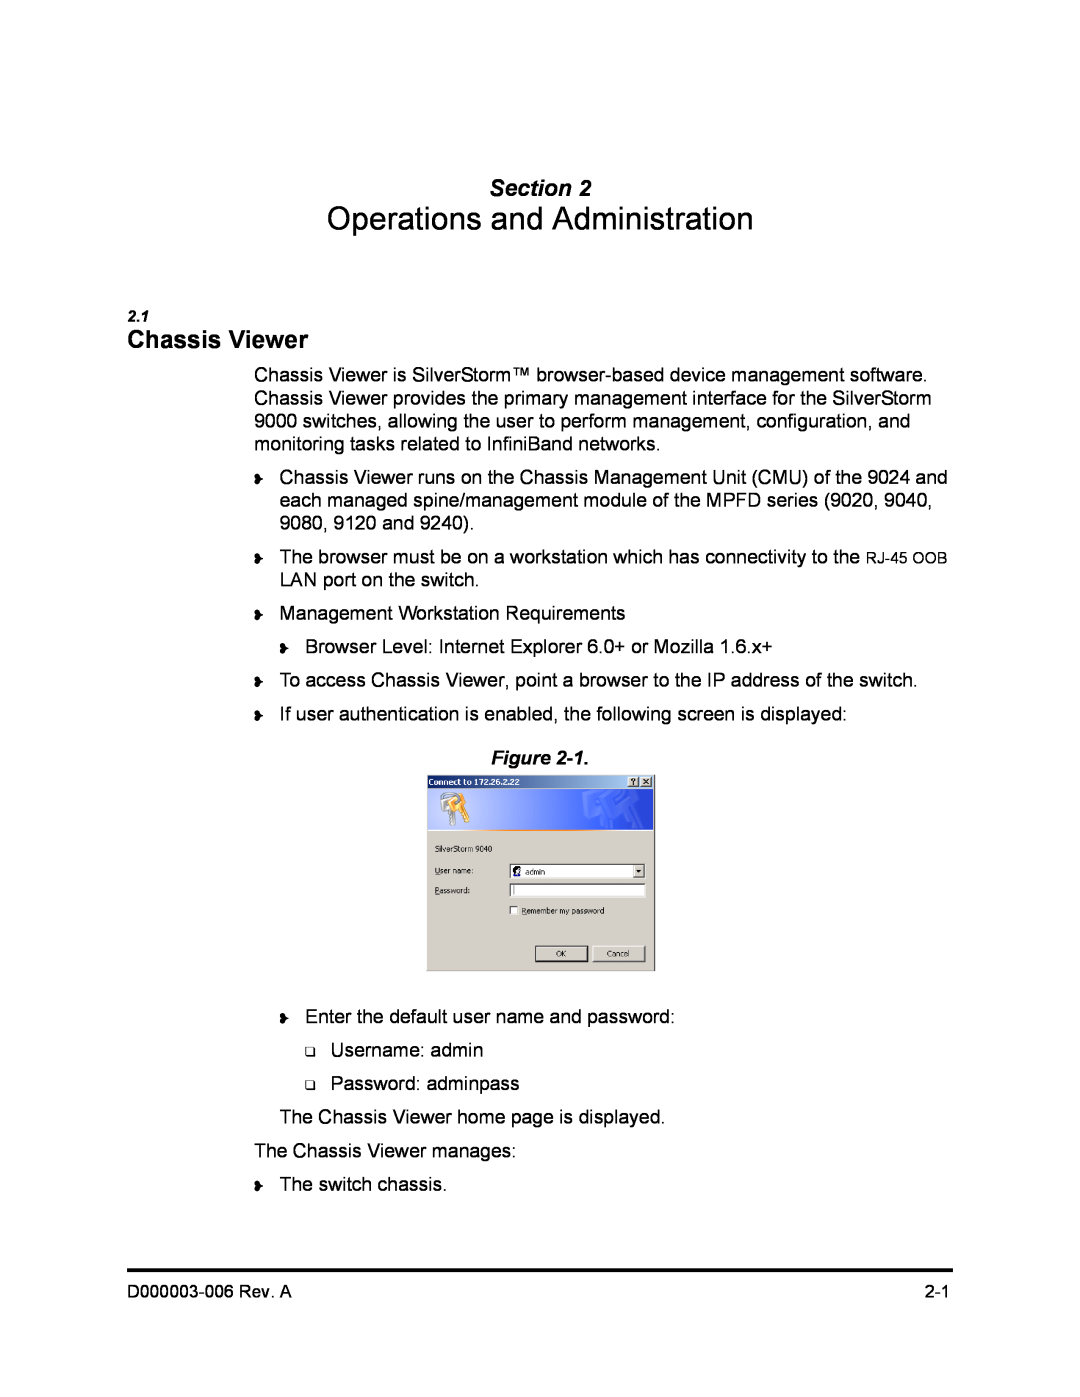 Q-Logic 9000 manual Operations and Administration, Chassis Viewer, Section 